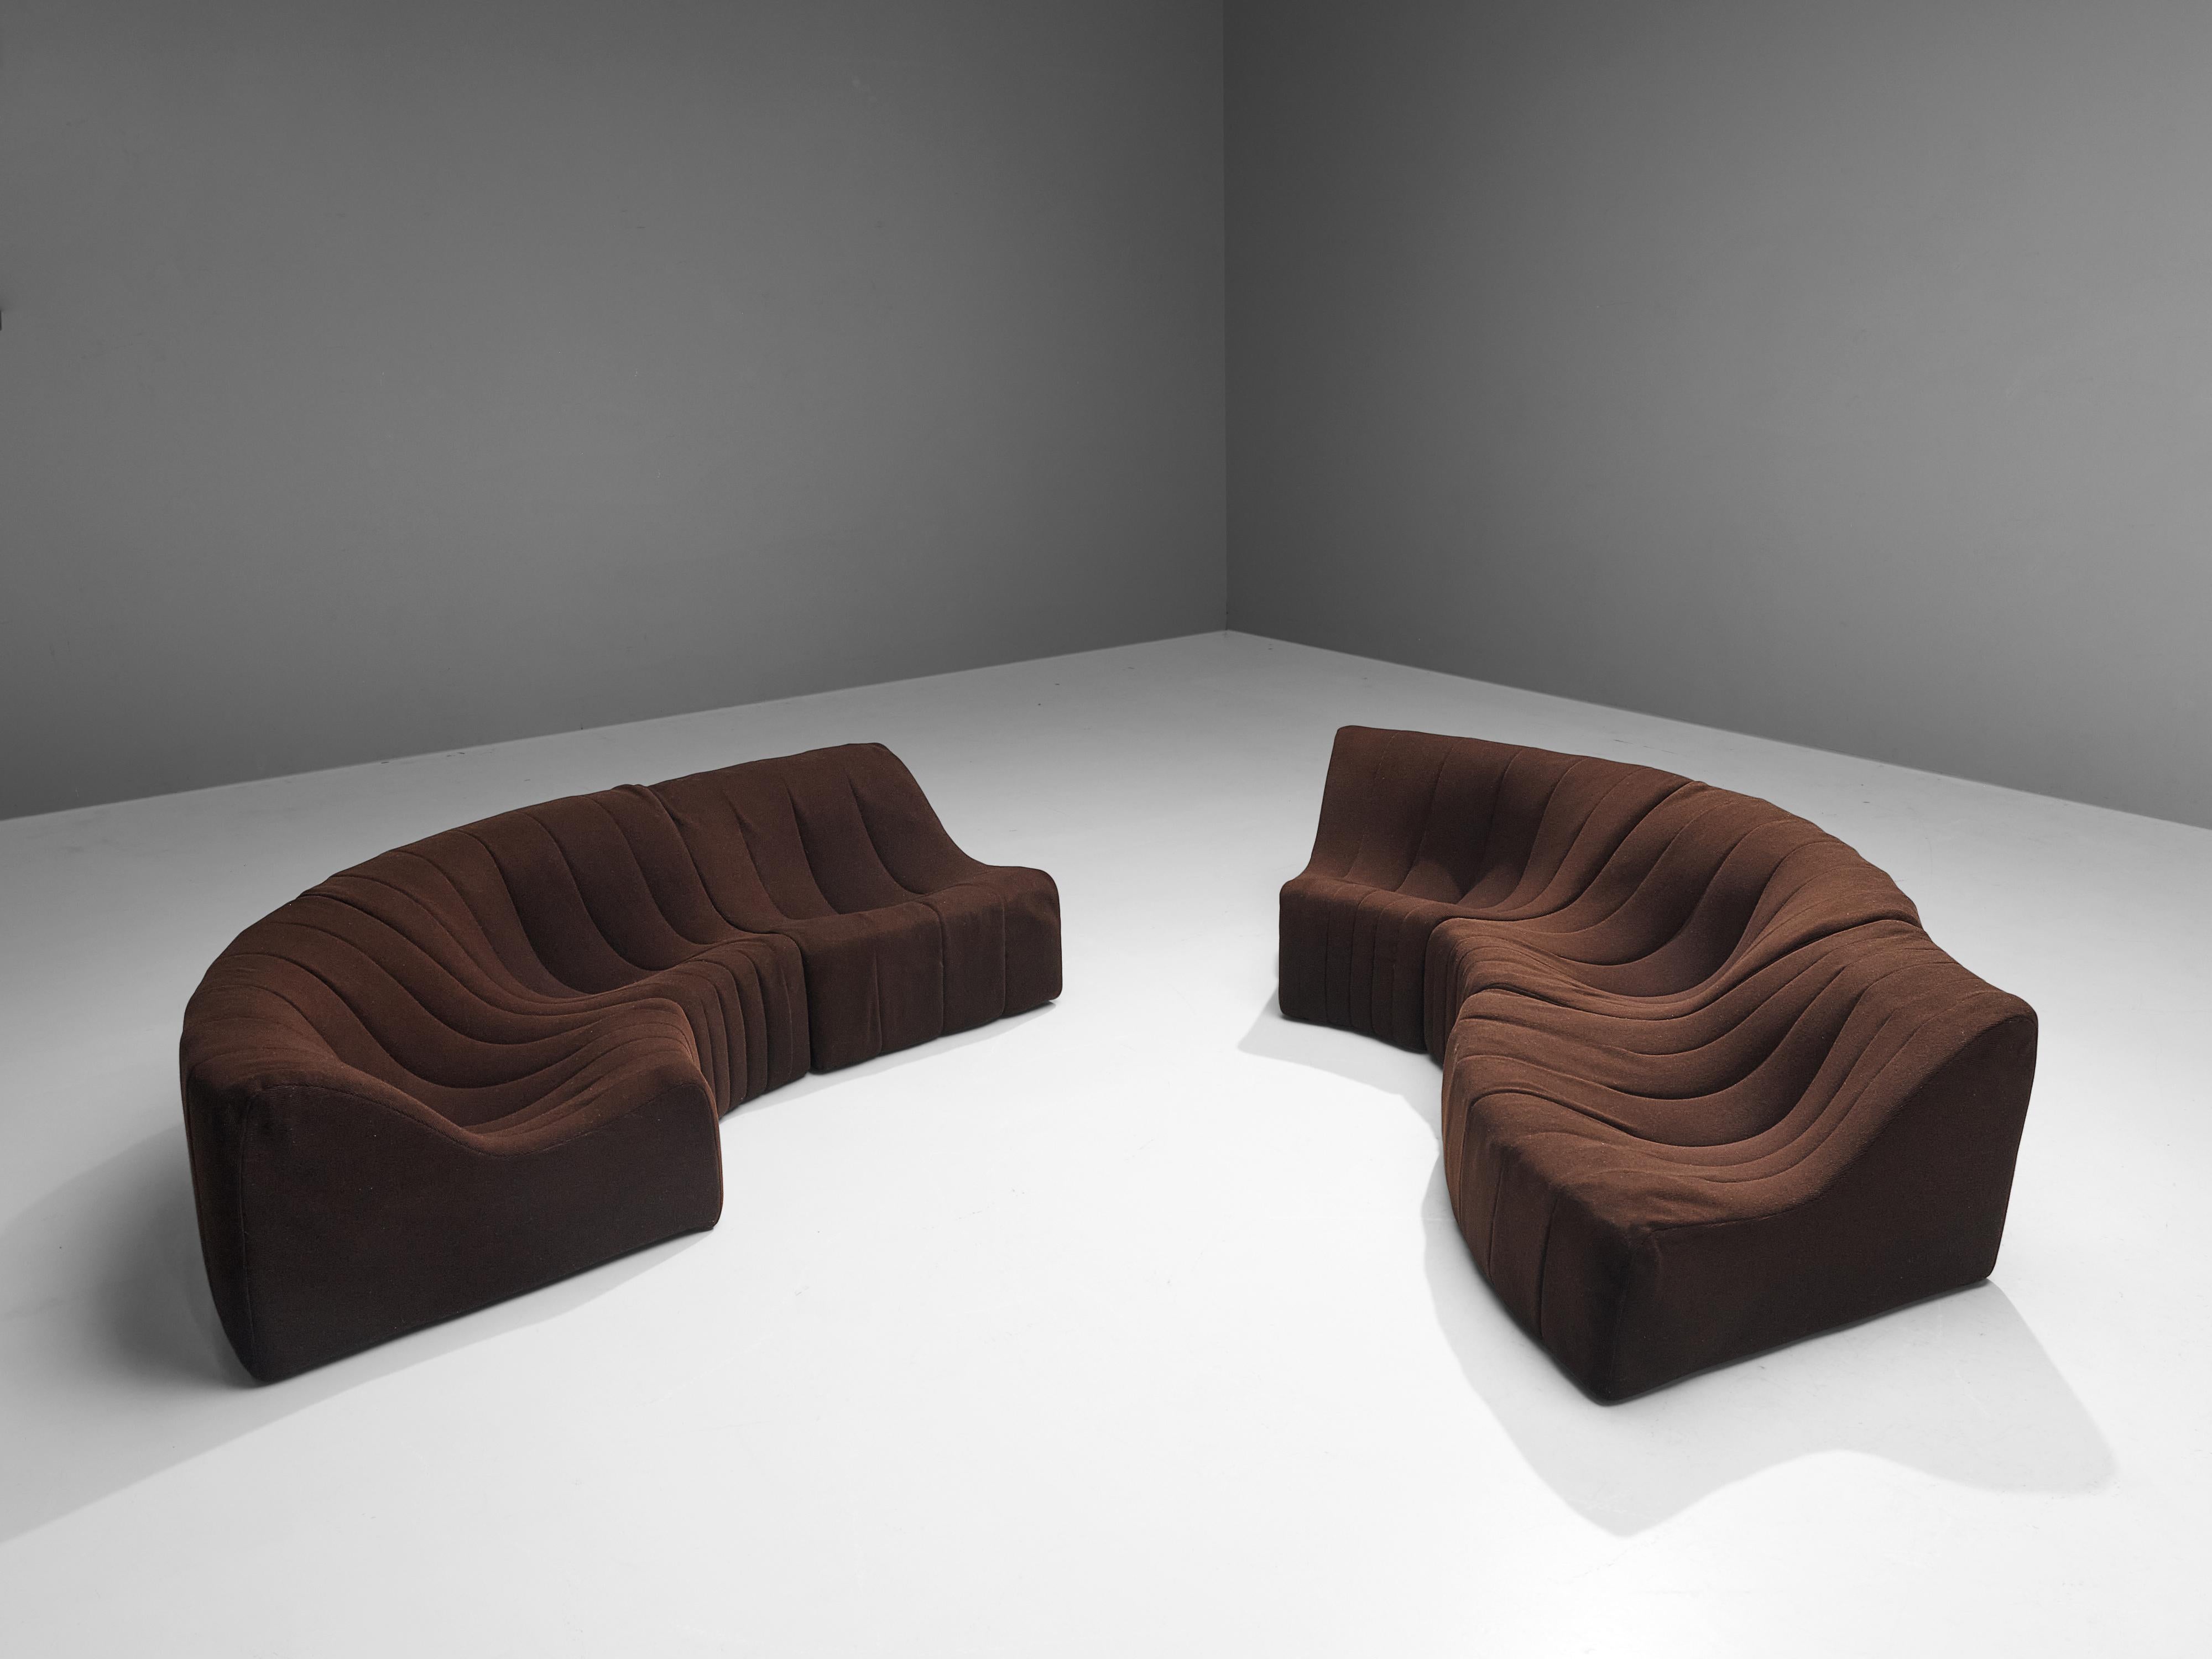 Fabric Kwok Hoi Chan for Steiner´Chromatic´ Modular Sofa in Brown Upholstery